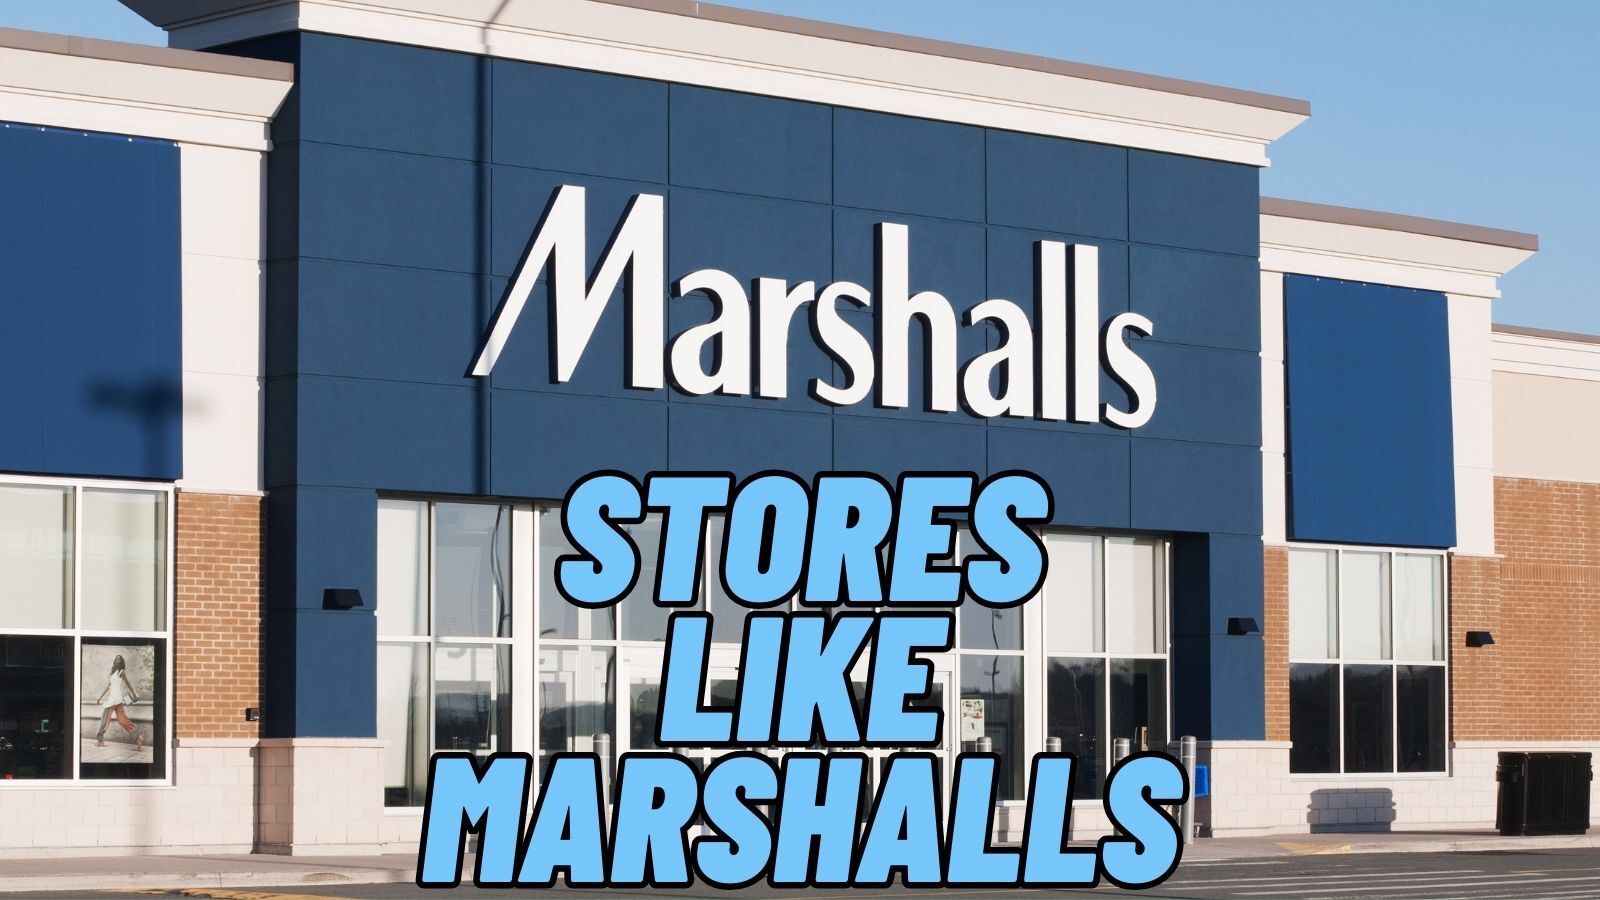 13 Best Stores Like Marshalls for Off-Price Clothes